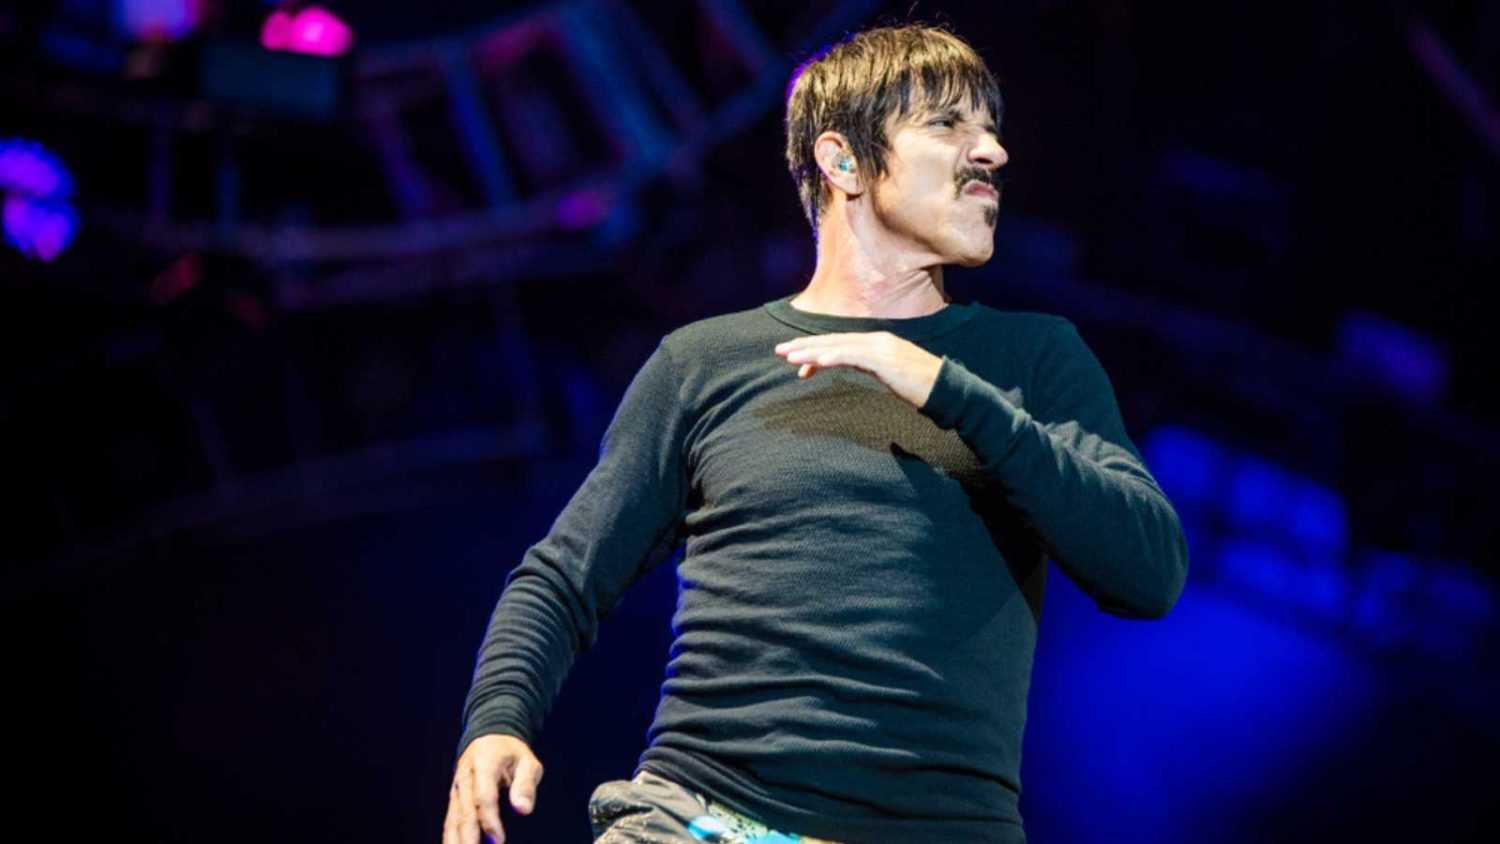 Anthony Kiedis from Red Hot Chili Peppers performs in concert at Rock im Park festival on June 5, 2016 in Nuremberg, Germany